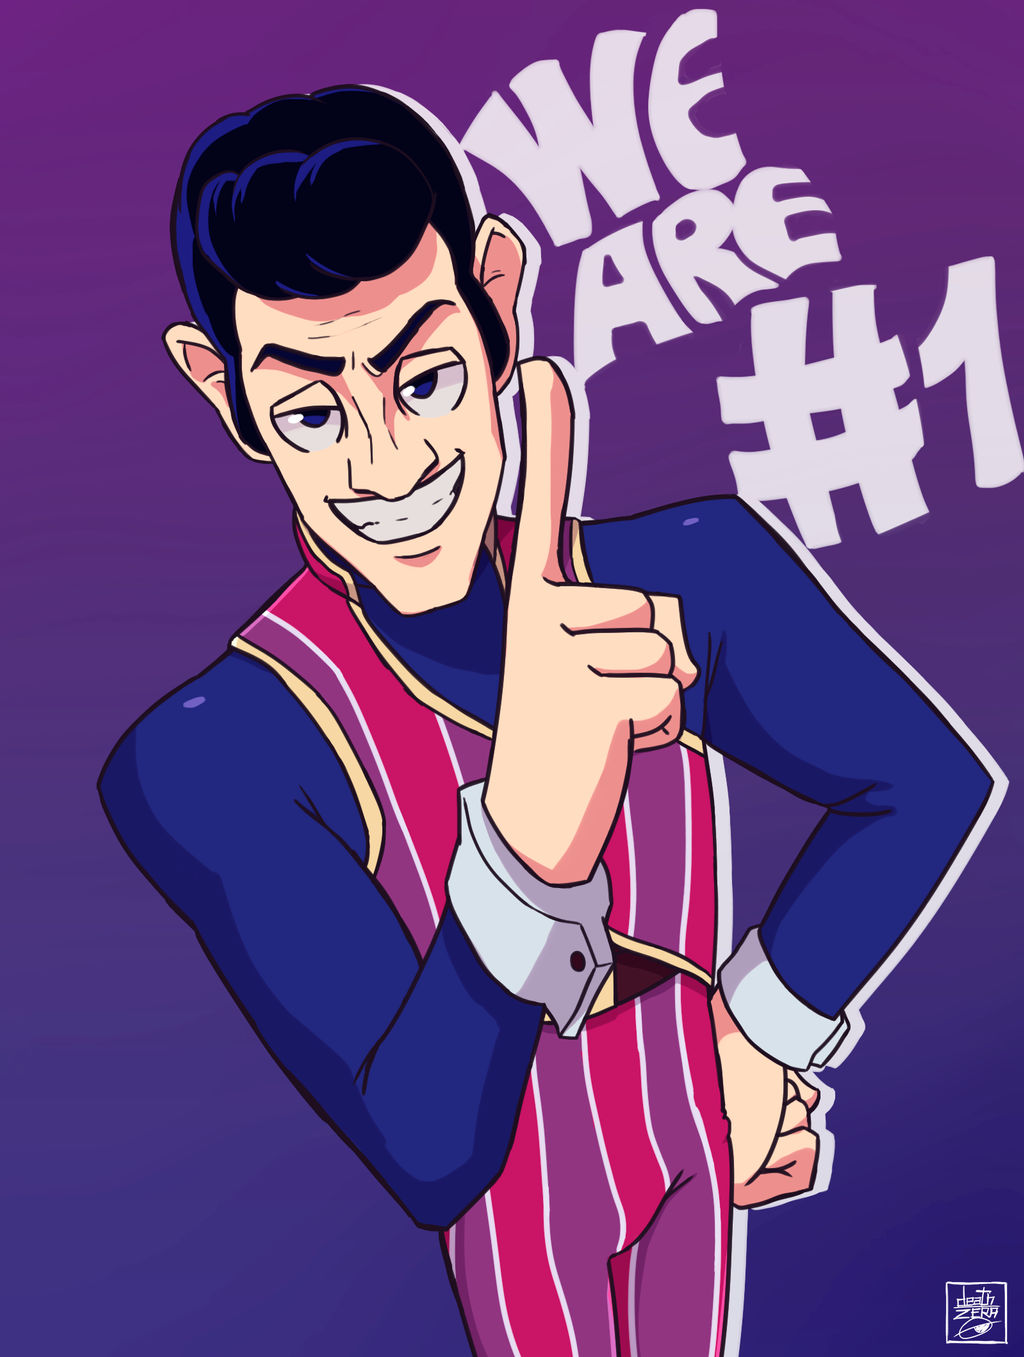 We are Number One! by deathZera on DeviantArt